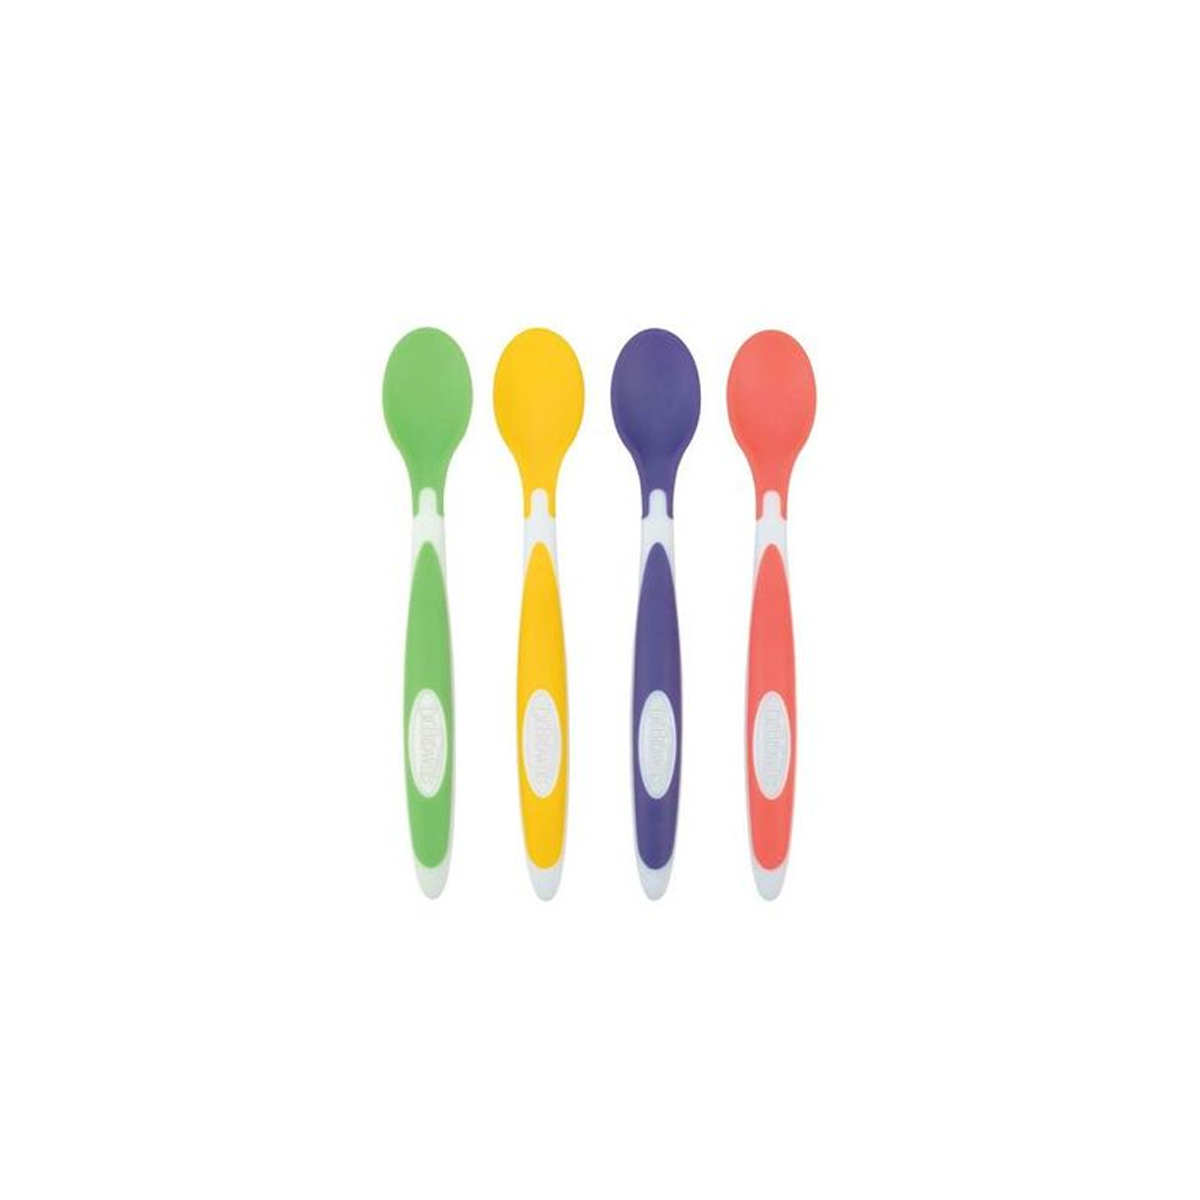 Dr Brown's Soft-Tip Spoon, 4-Pack (Yellow, Green, Purple, Red)